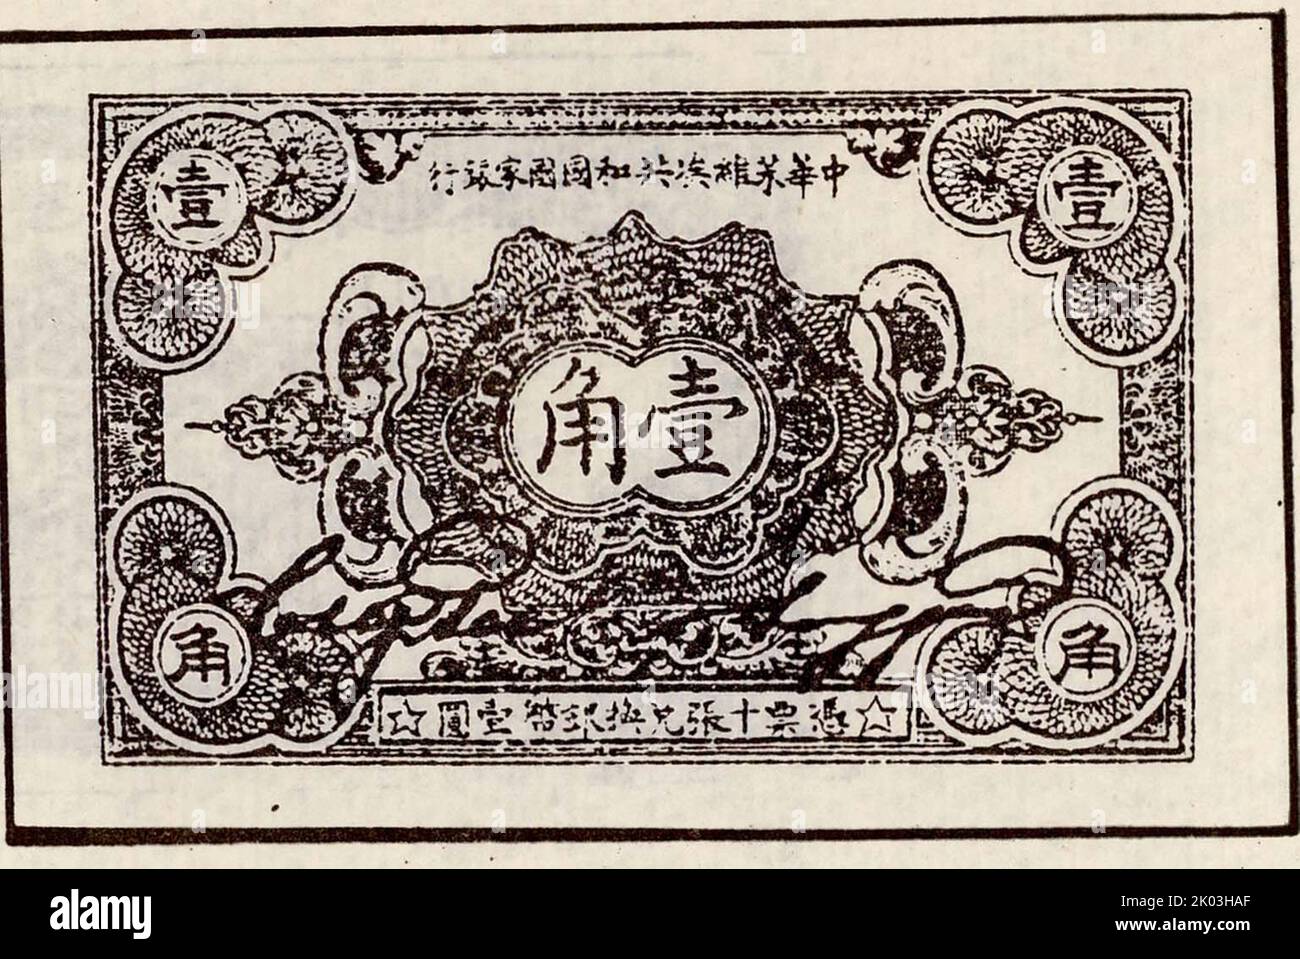 A 10 Cent Bill; Printed by the State Bank of the Chinese Soviet Republic. Stock Photo